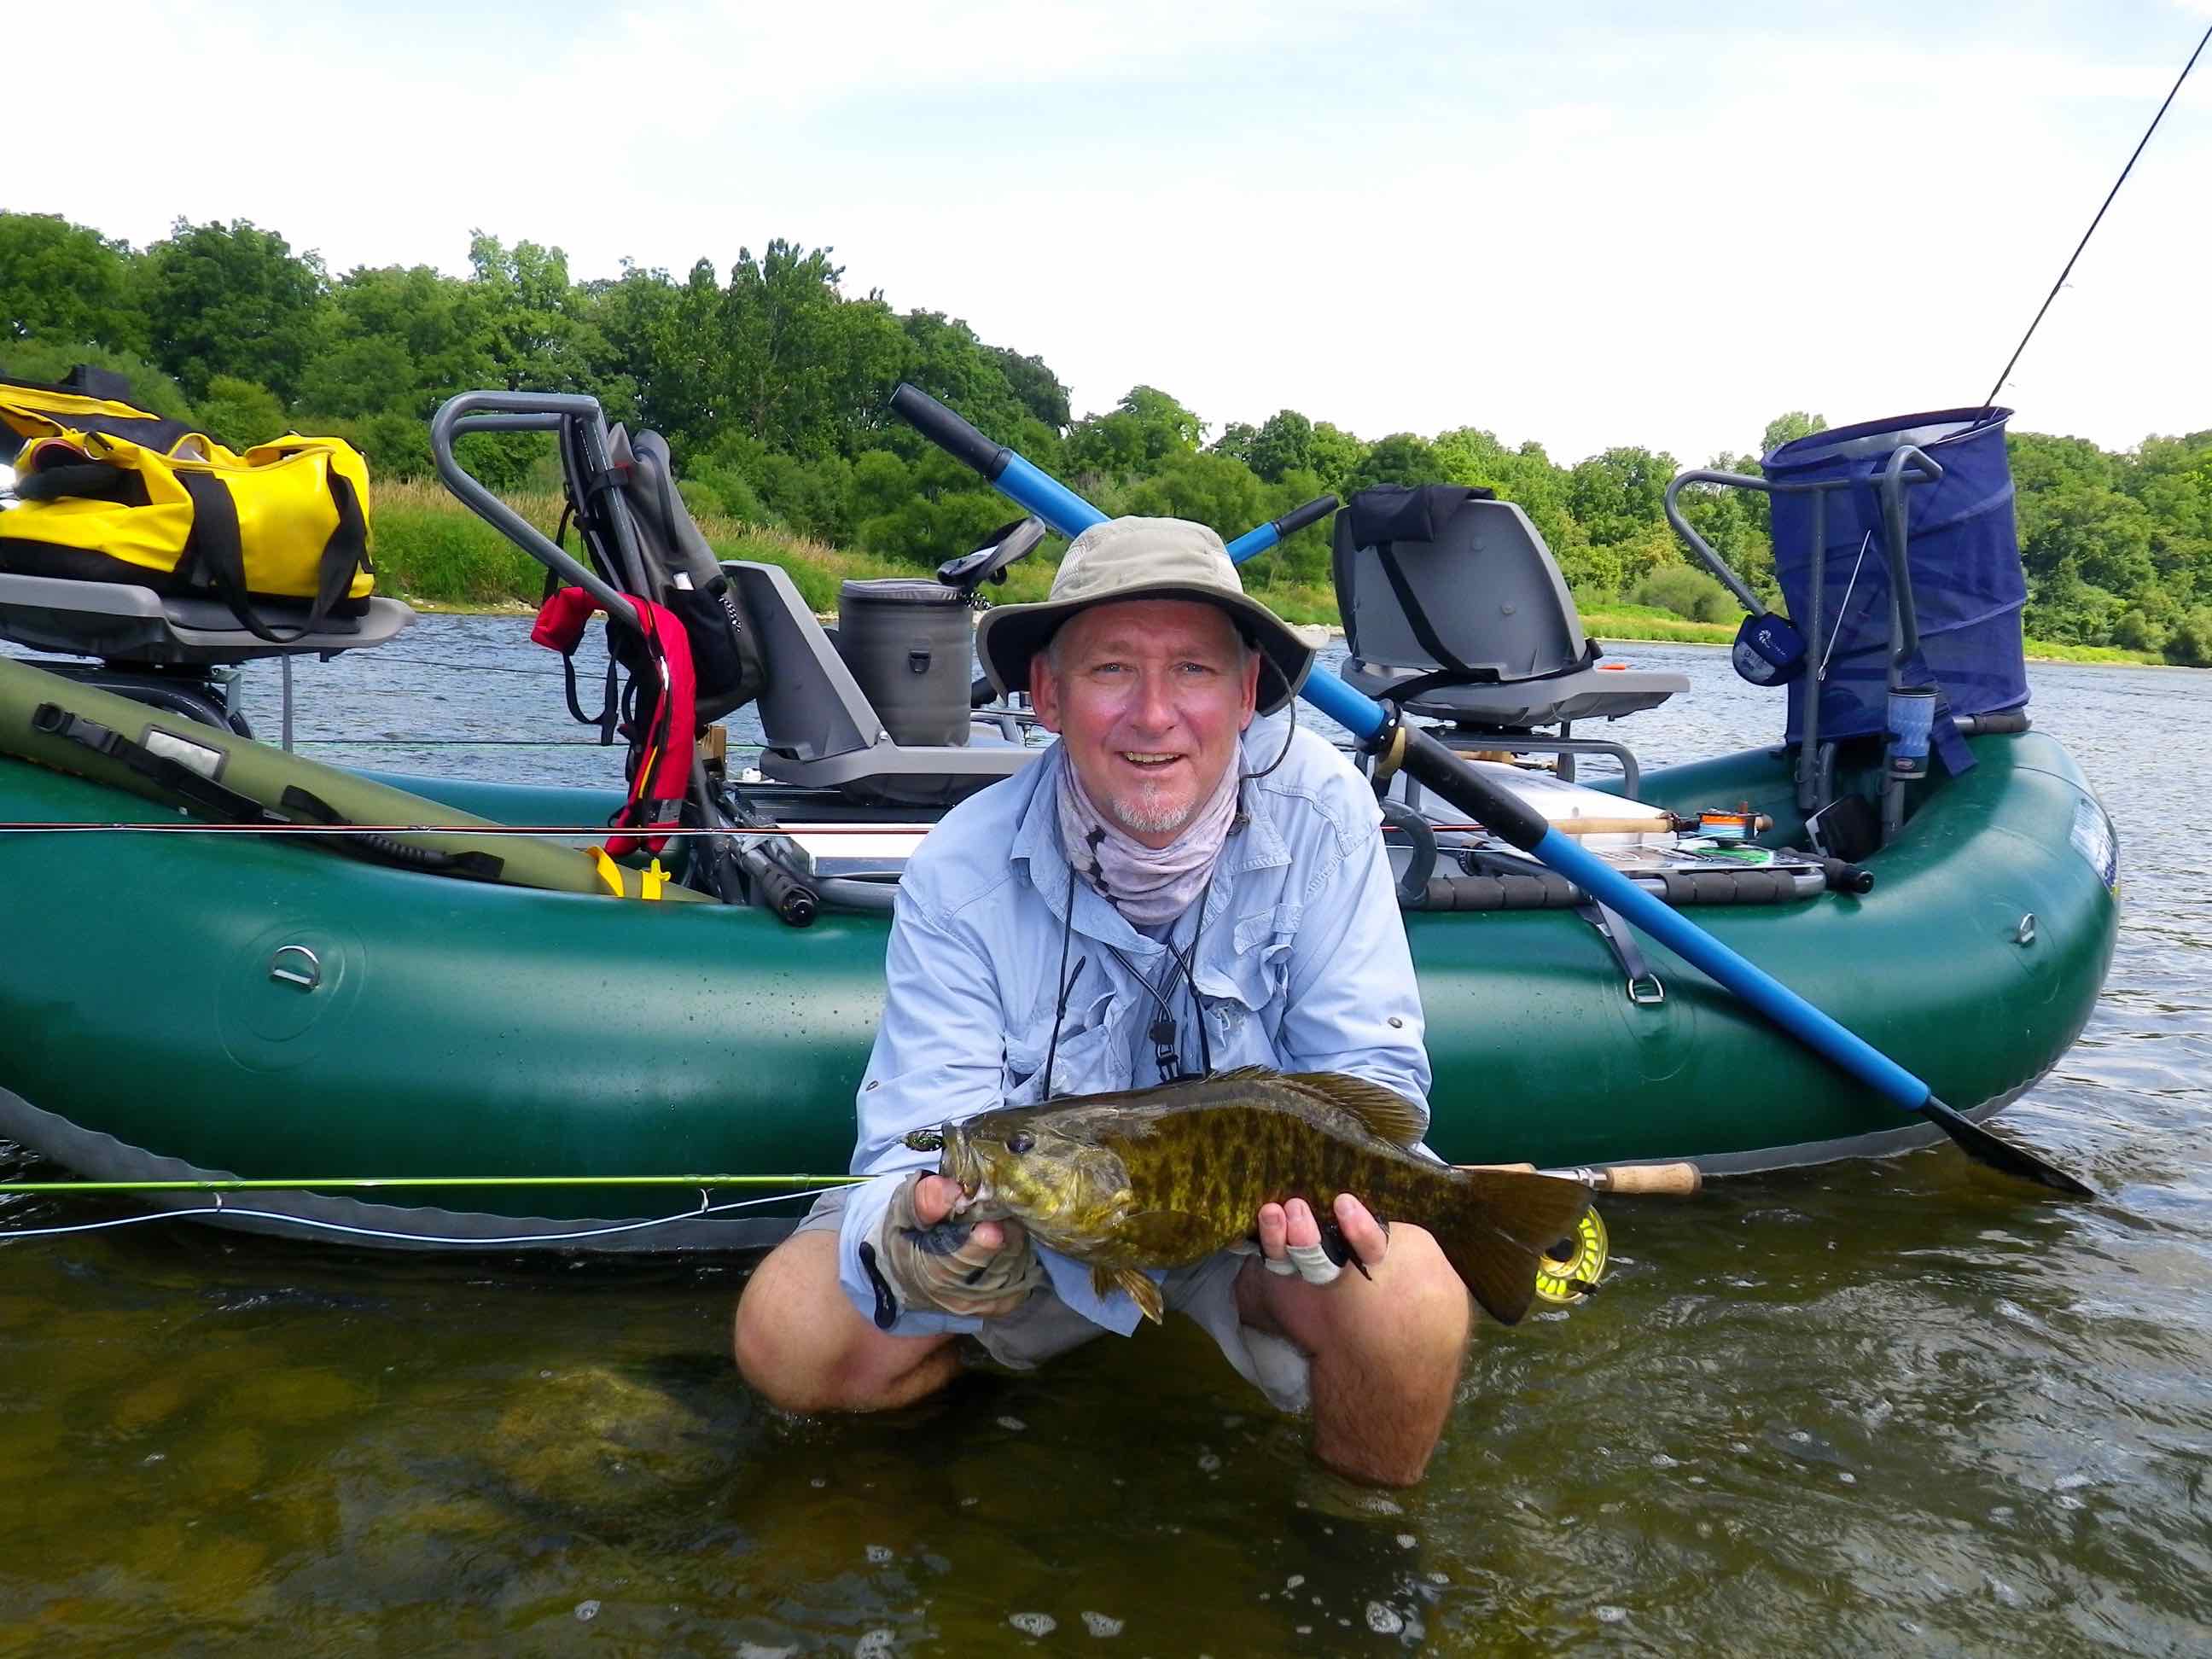 https://thefirstcast.ca/wp-content/uploads/2014/01/Outcast-Pontoon-Boat-Pac-1300-Grand-River-Fly-Rod-Smallmouth-Bass-Resized.jpg